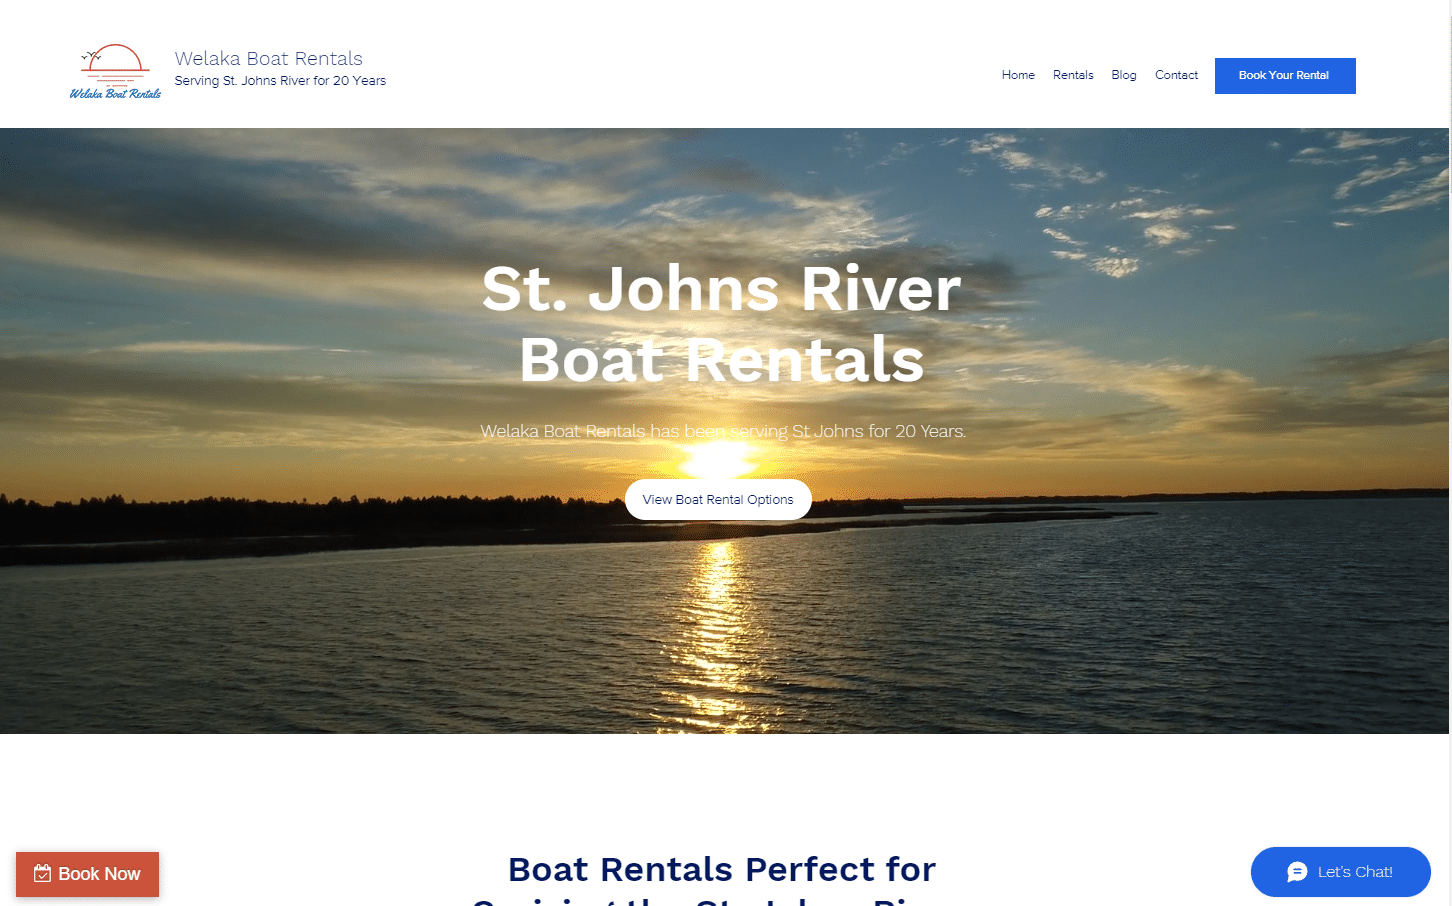 Welaka Boat Rentals by travel and Website Design by Rockon tourism marketing agency